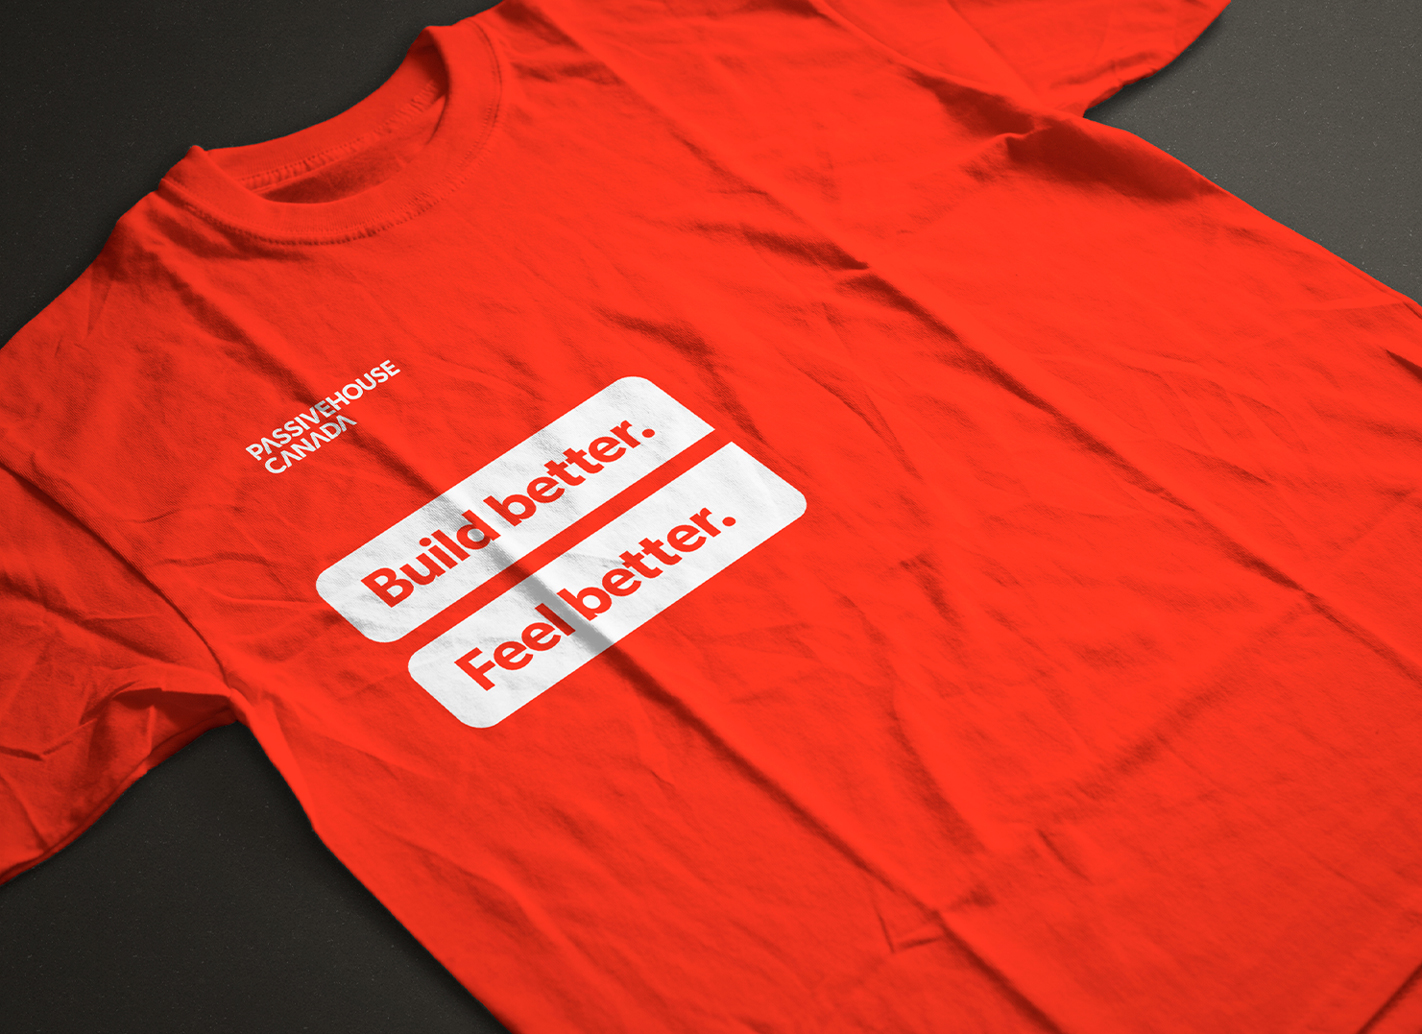 A red T-shirt that has two white rectangles on it that say "Build better." and "Feel better." along with the logo.